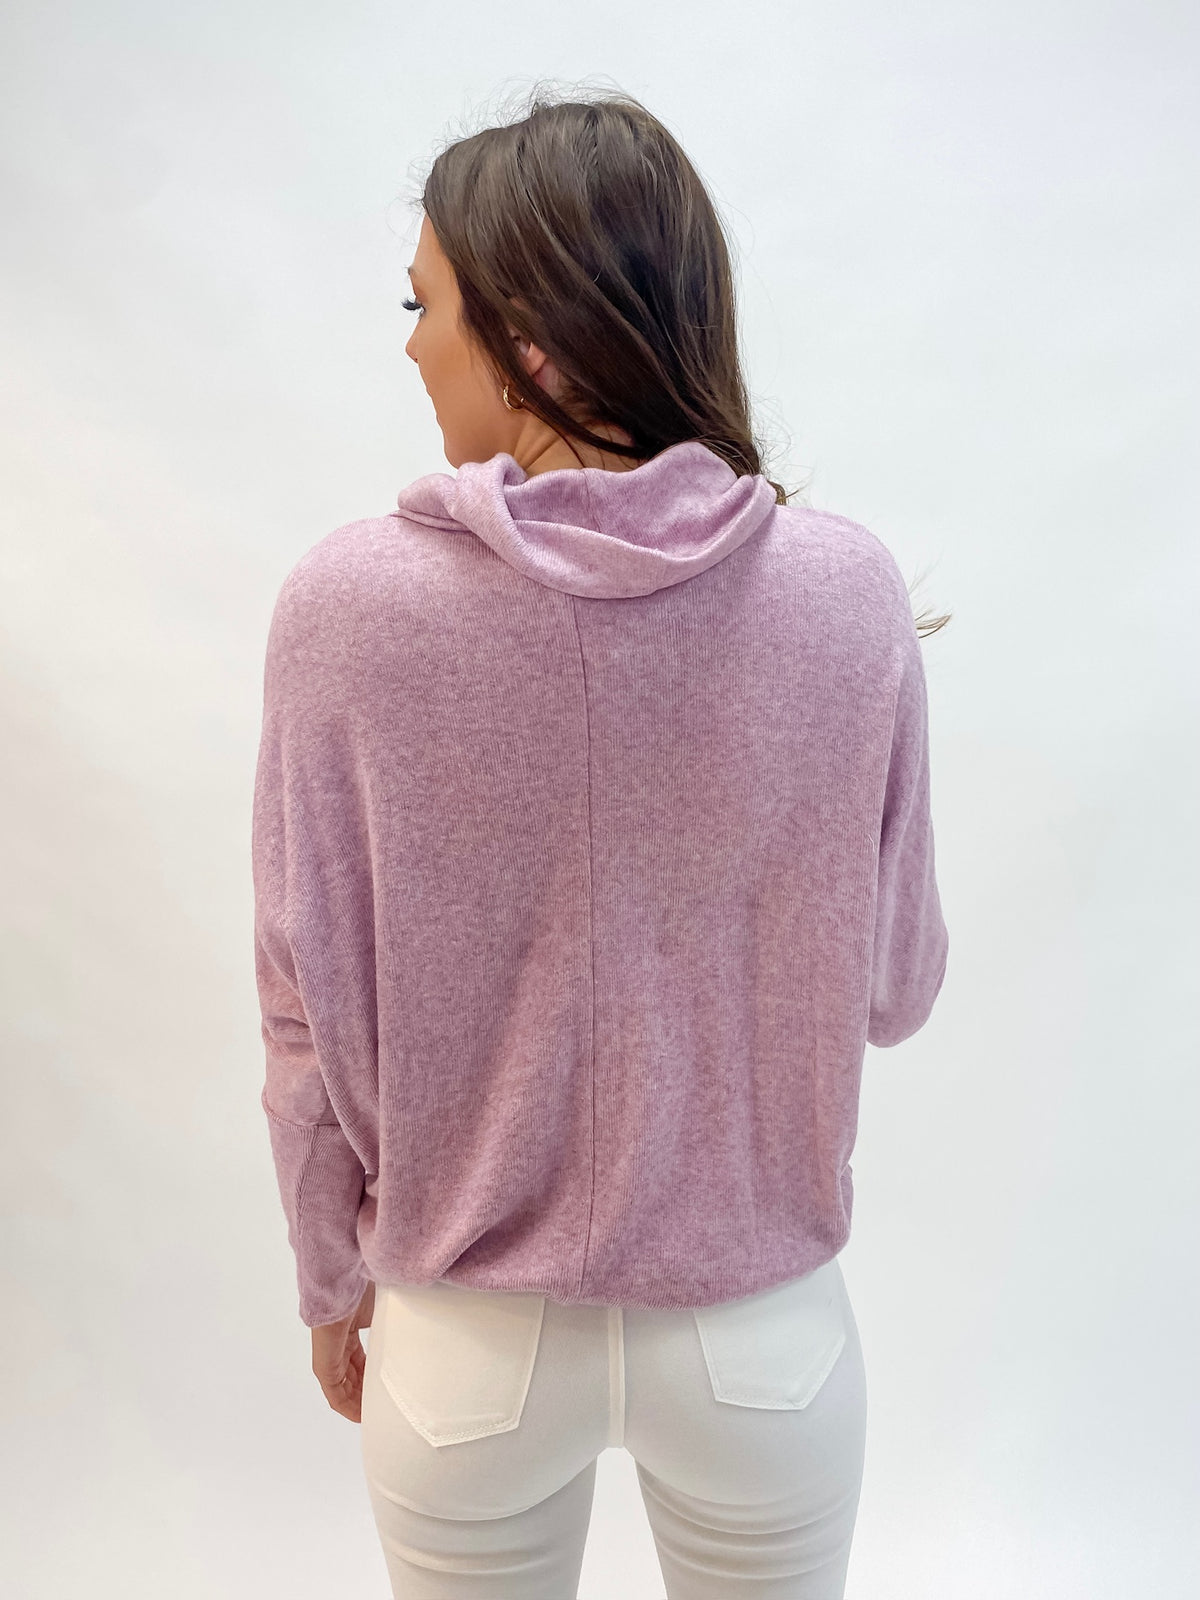 I Love You Berry Much Cowl Neck Light Knit Sweater Top